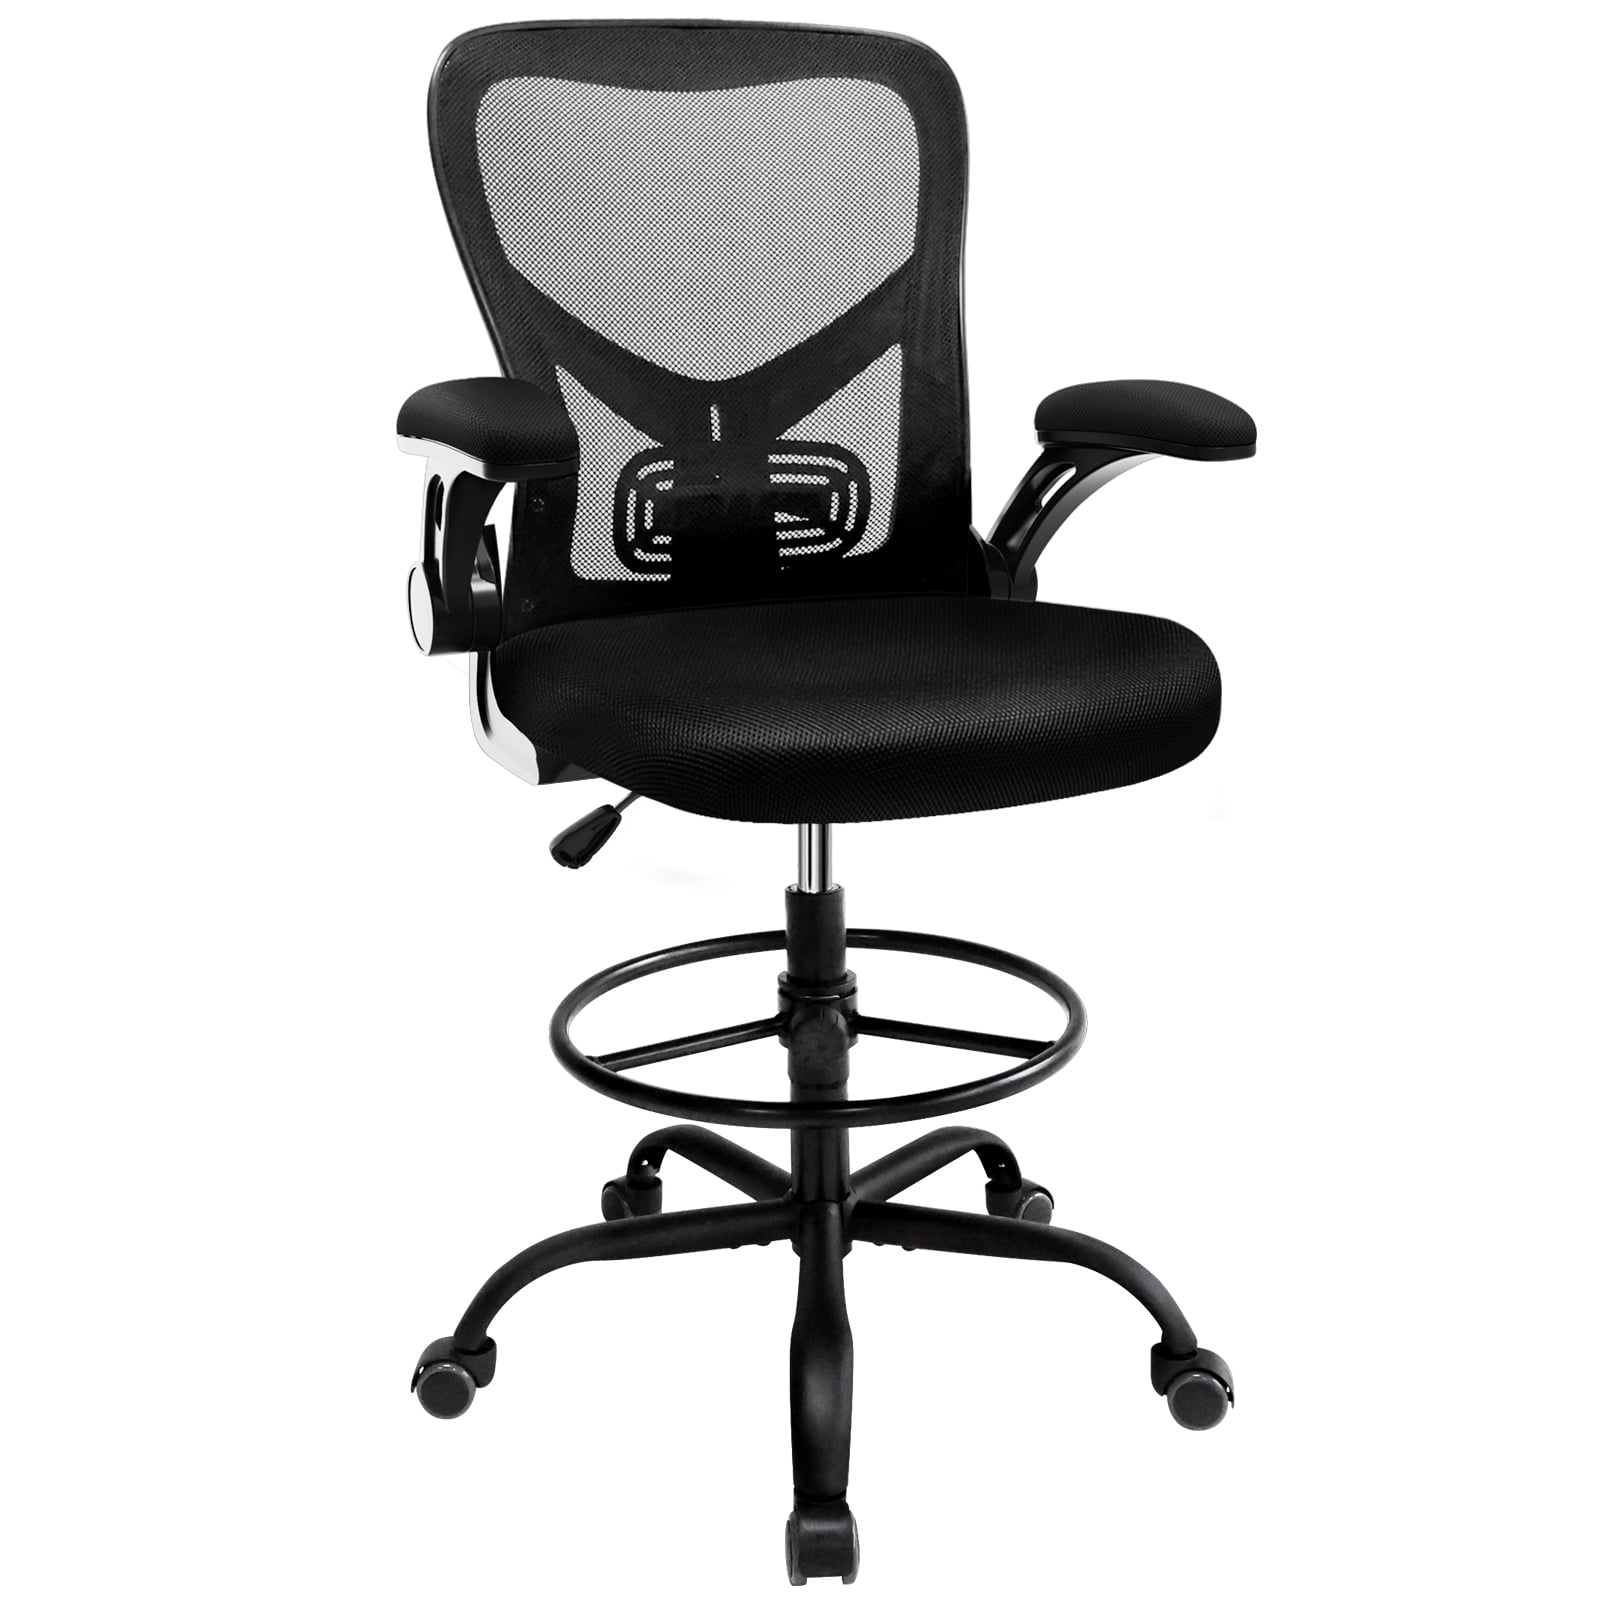 Drafting Chair Tall Office Chair Mid-Back Mesh Ergonomic Computer Chair High Adjustable Standing Desk Chair with Lumbar Support Adjustable Foot Ring and Flip-Up Arms,Black 